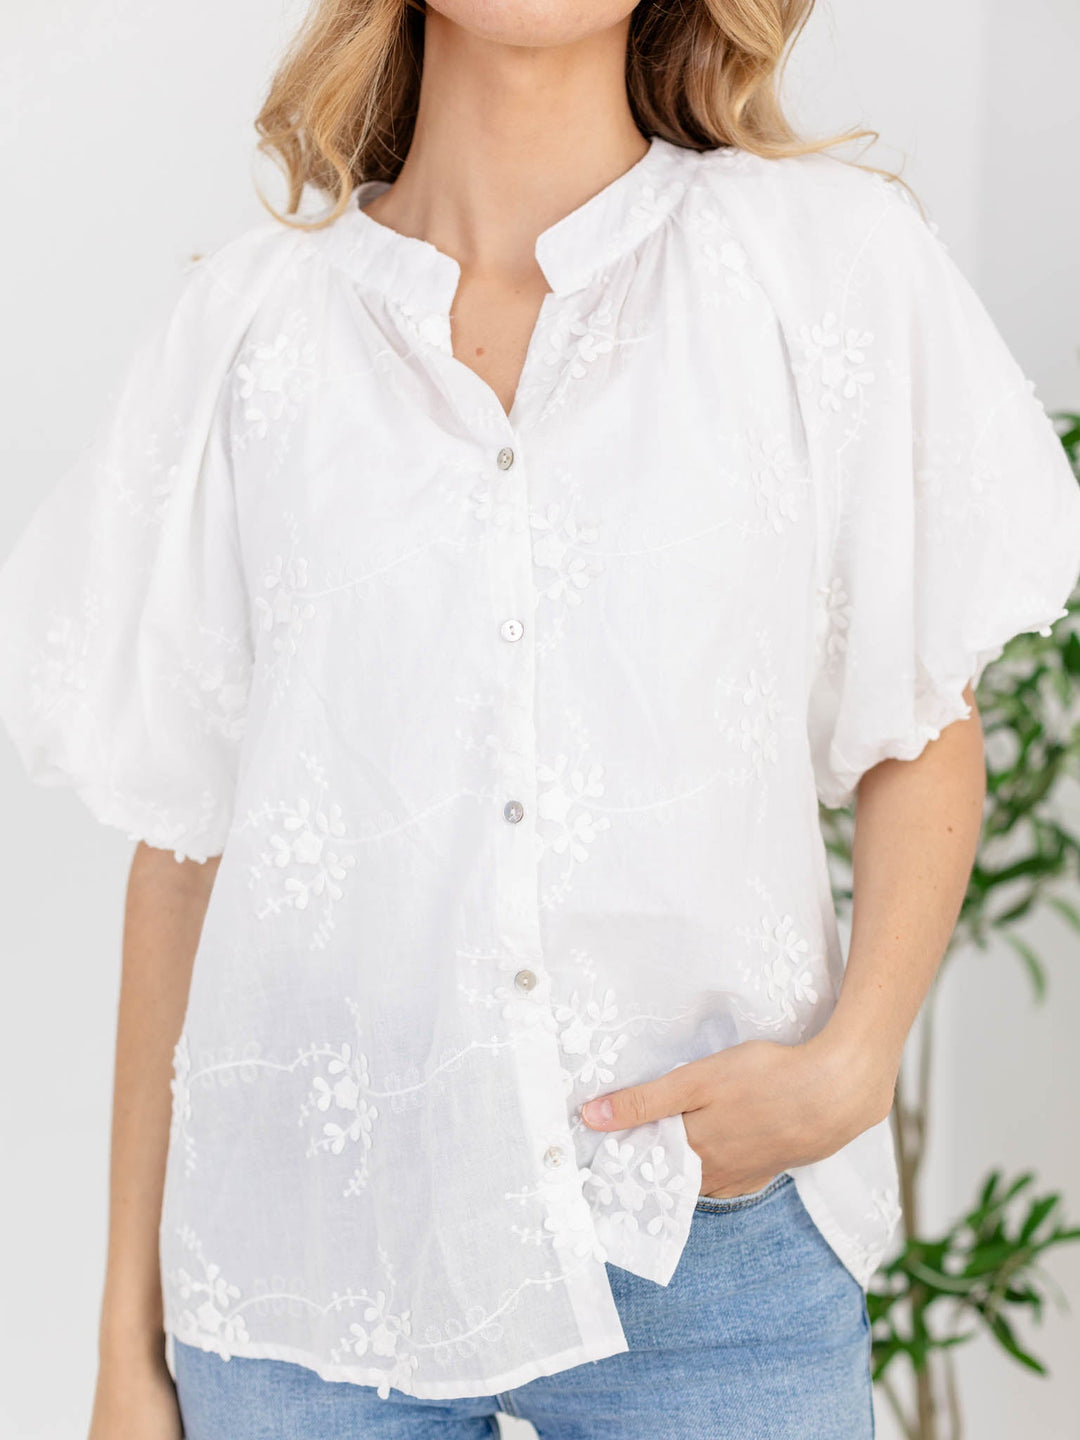 Embroidered Floral Button DownWoven tops